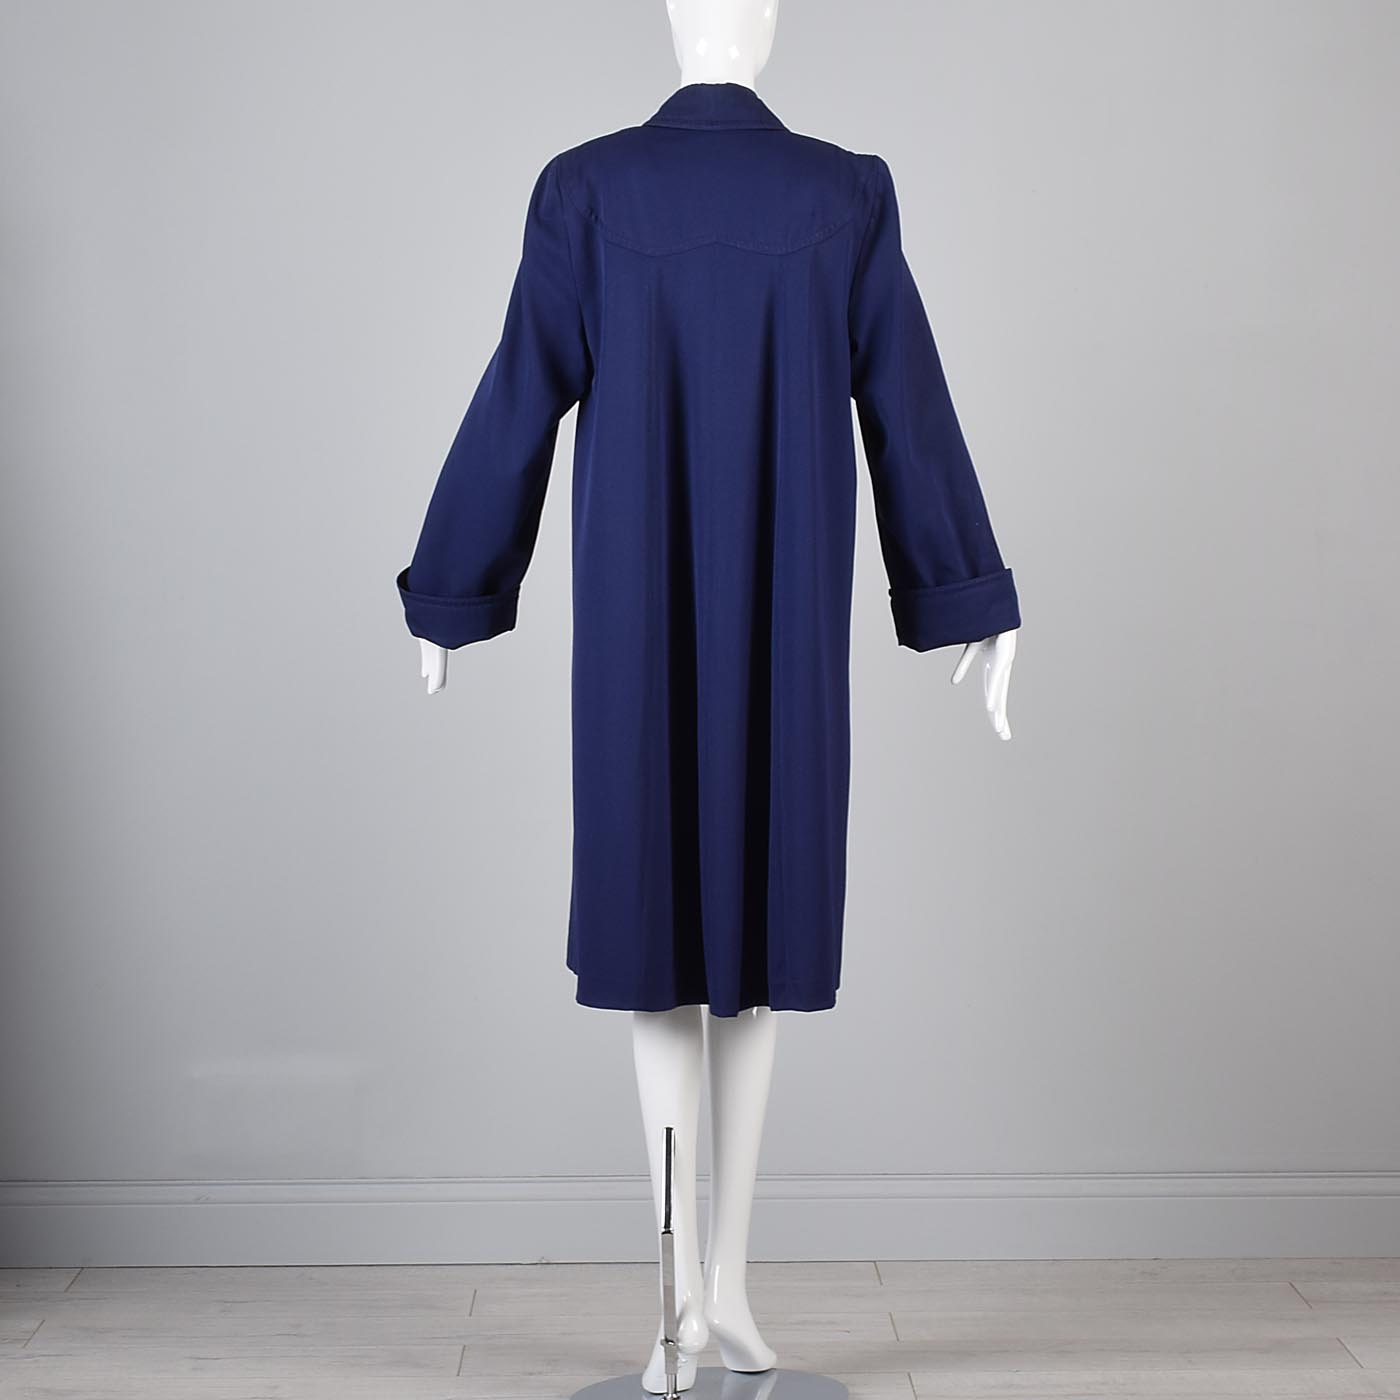 1940s Navy Coat with Lucite Button